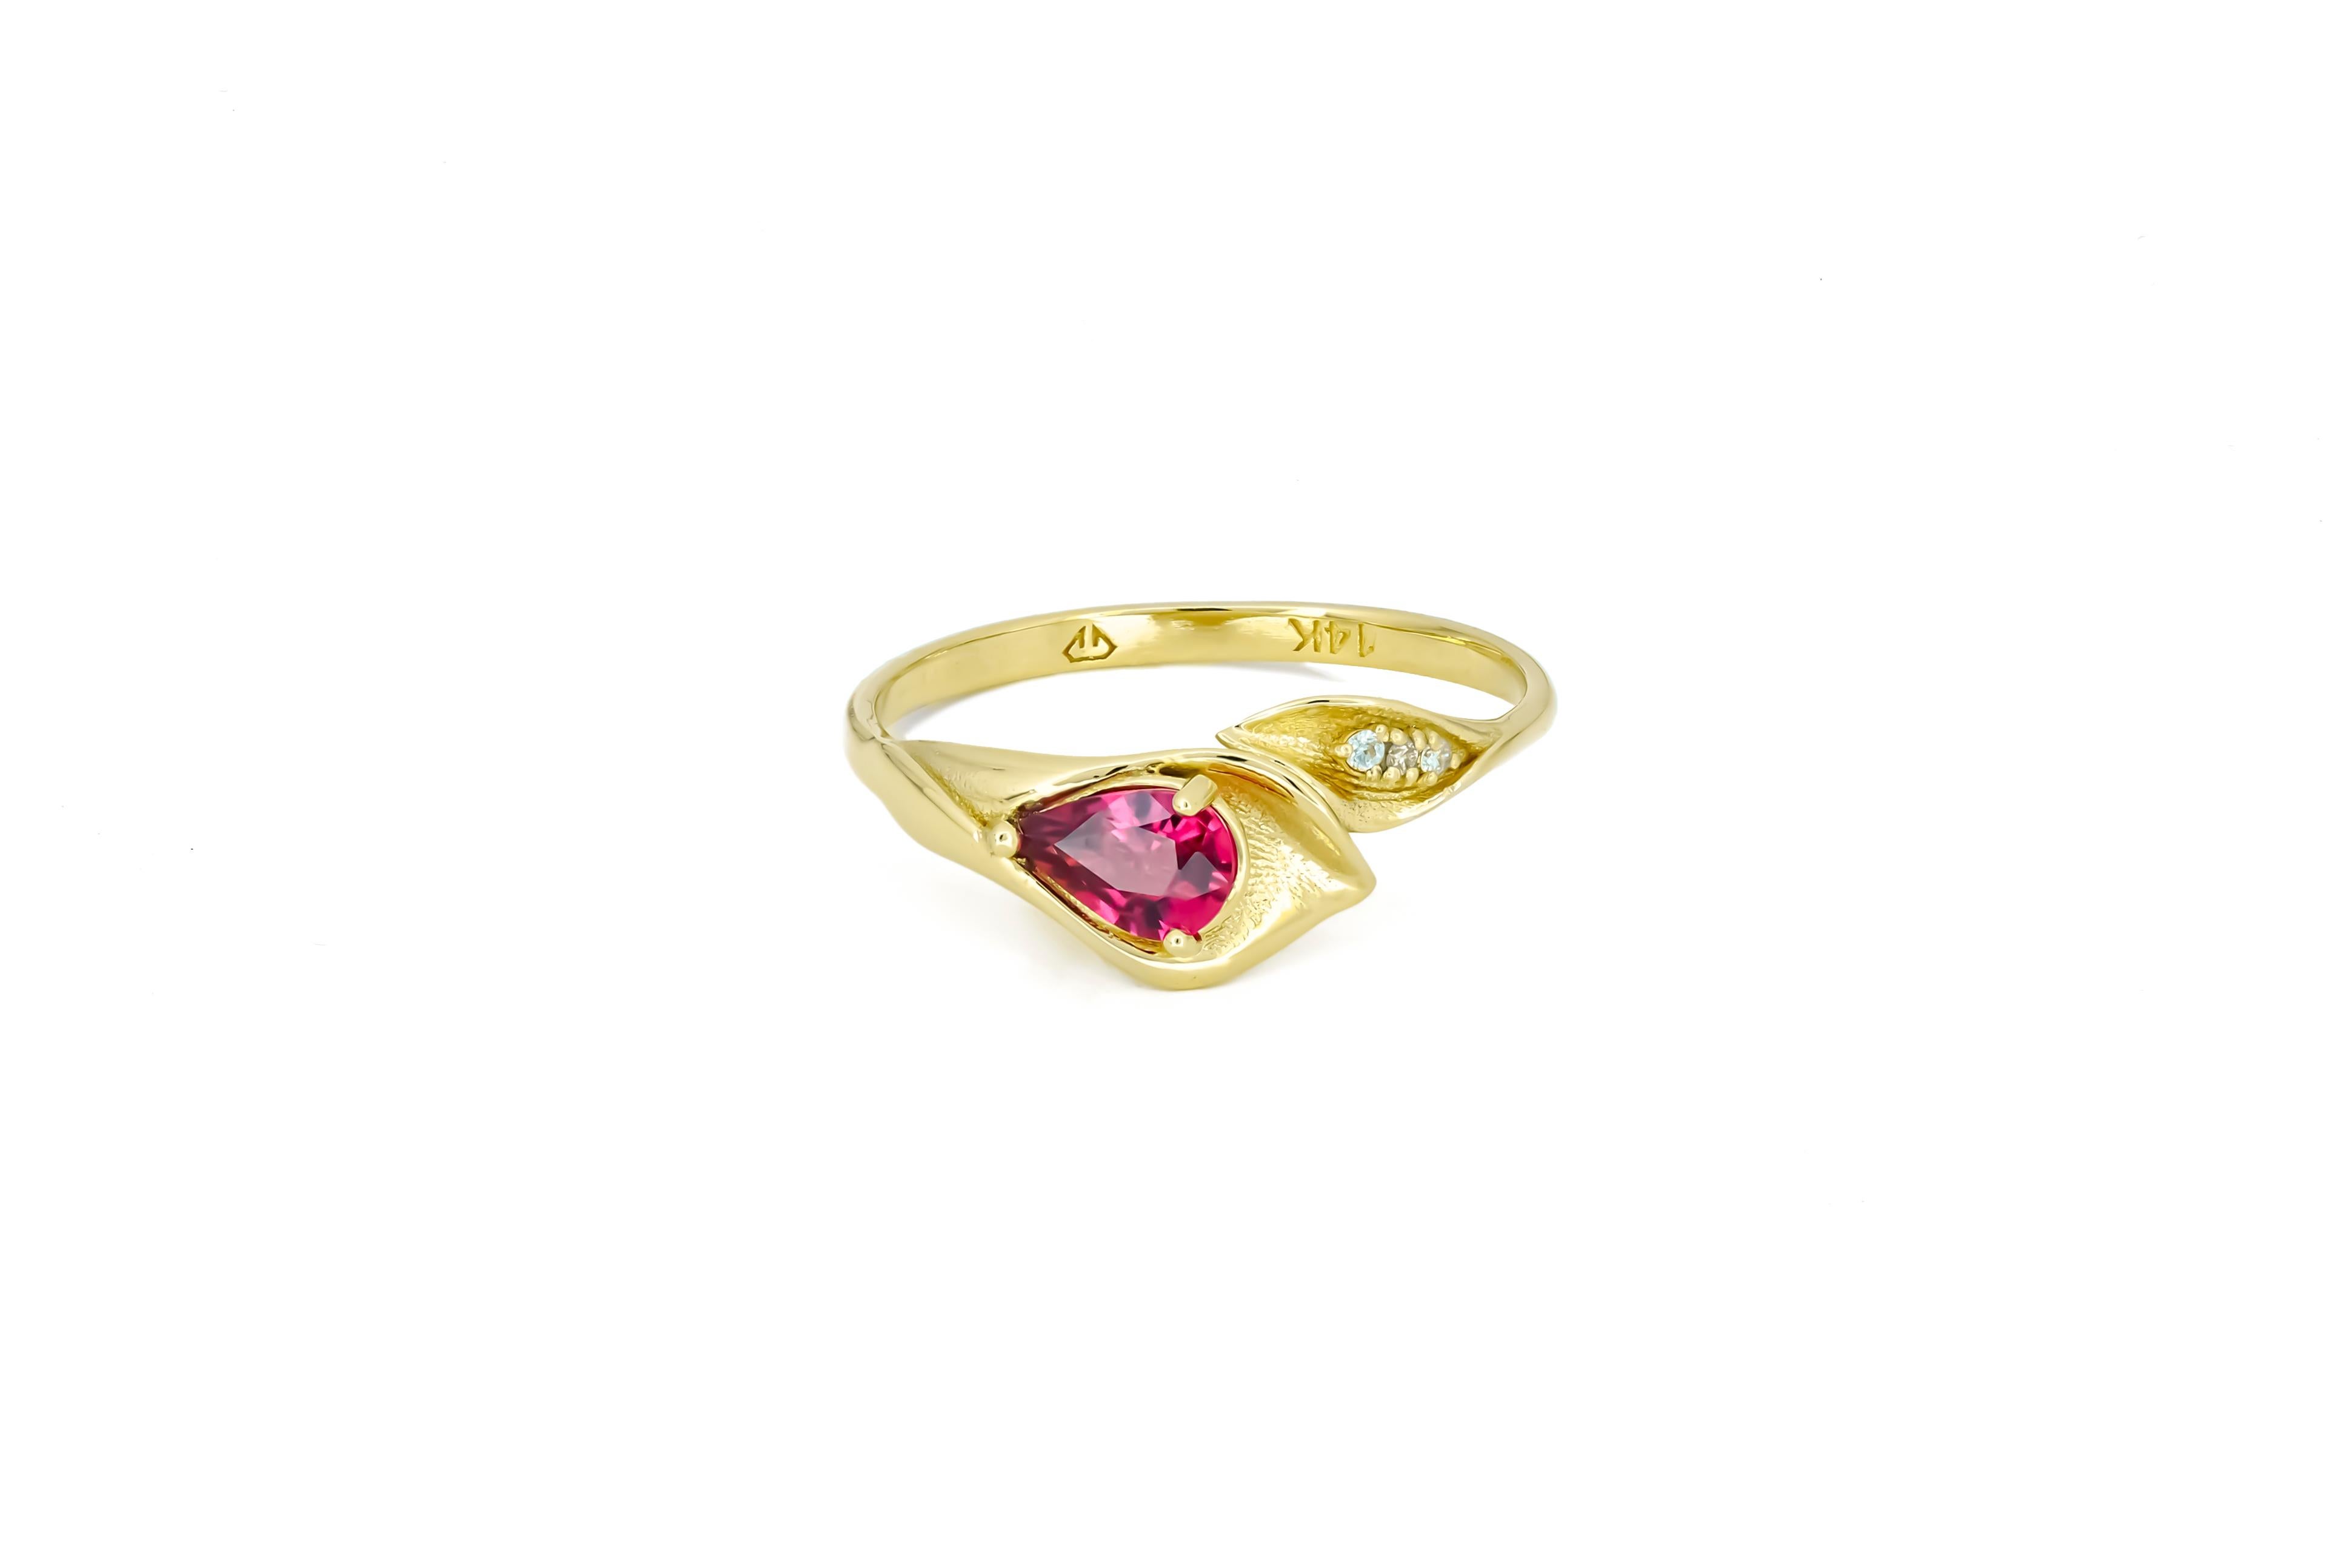 Lily Calla Gold Ring, 14 Karat Gold Ring with Garnet and Diamonds 1